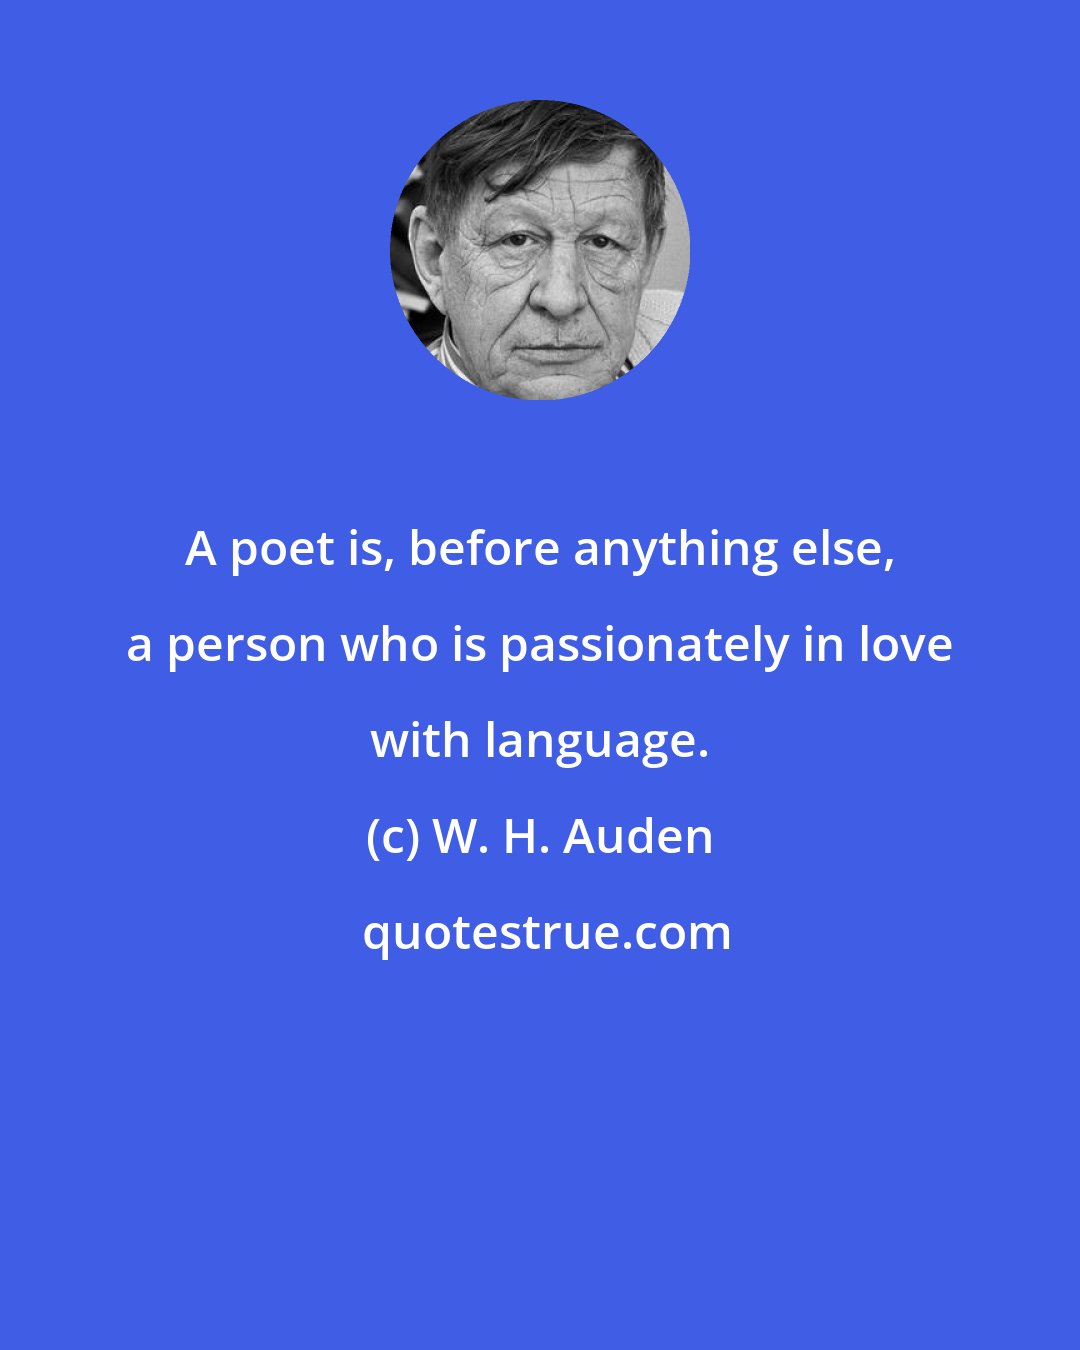 W. H. Auden: A poet is, before anything else, a person who is passionately in love with language.